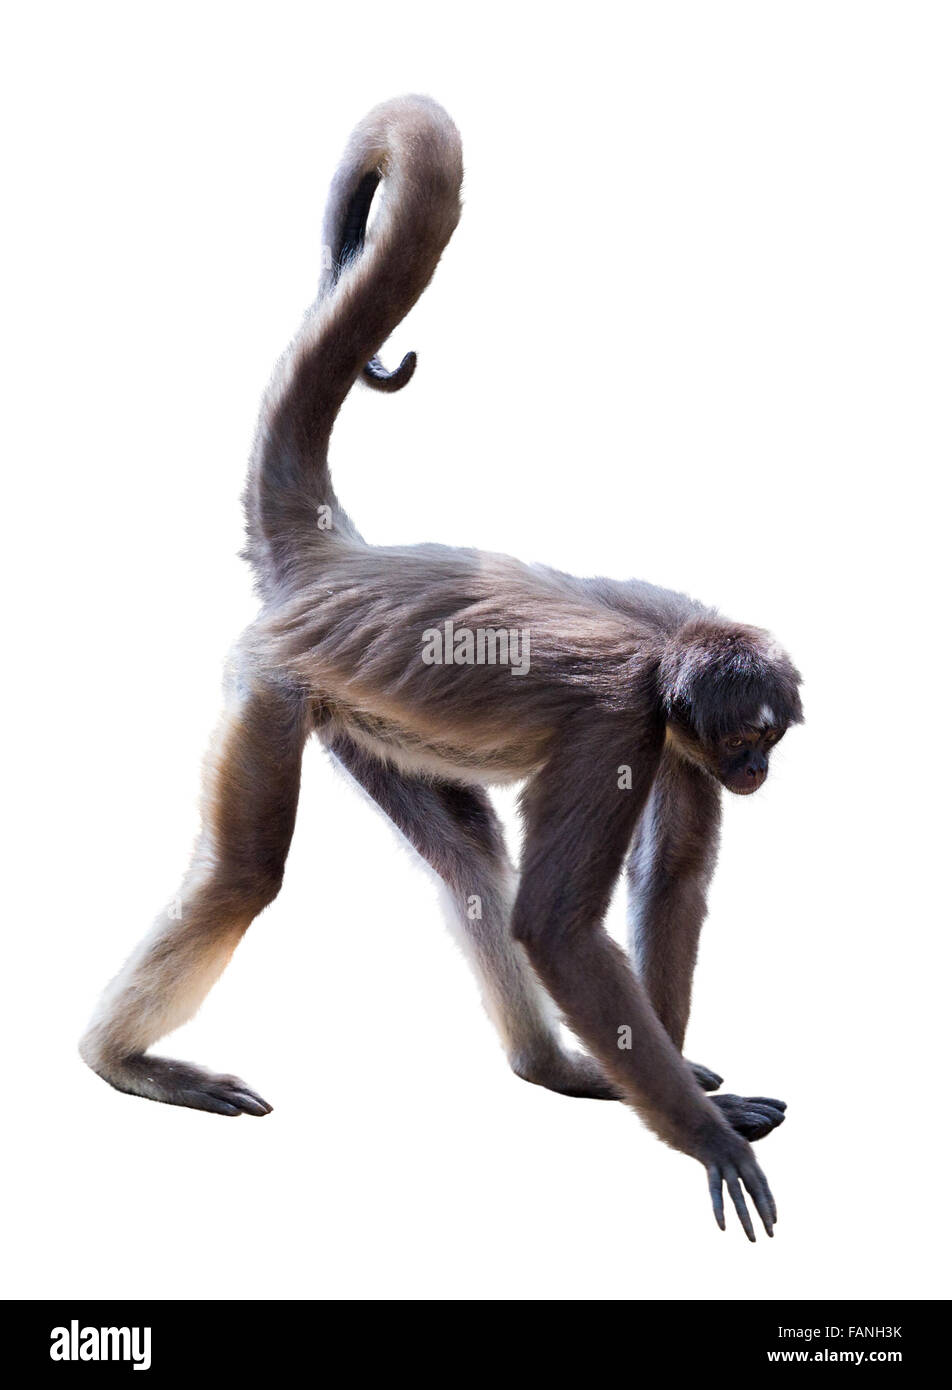 White-bellied spider monkey. Isolated over white Stock Photo